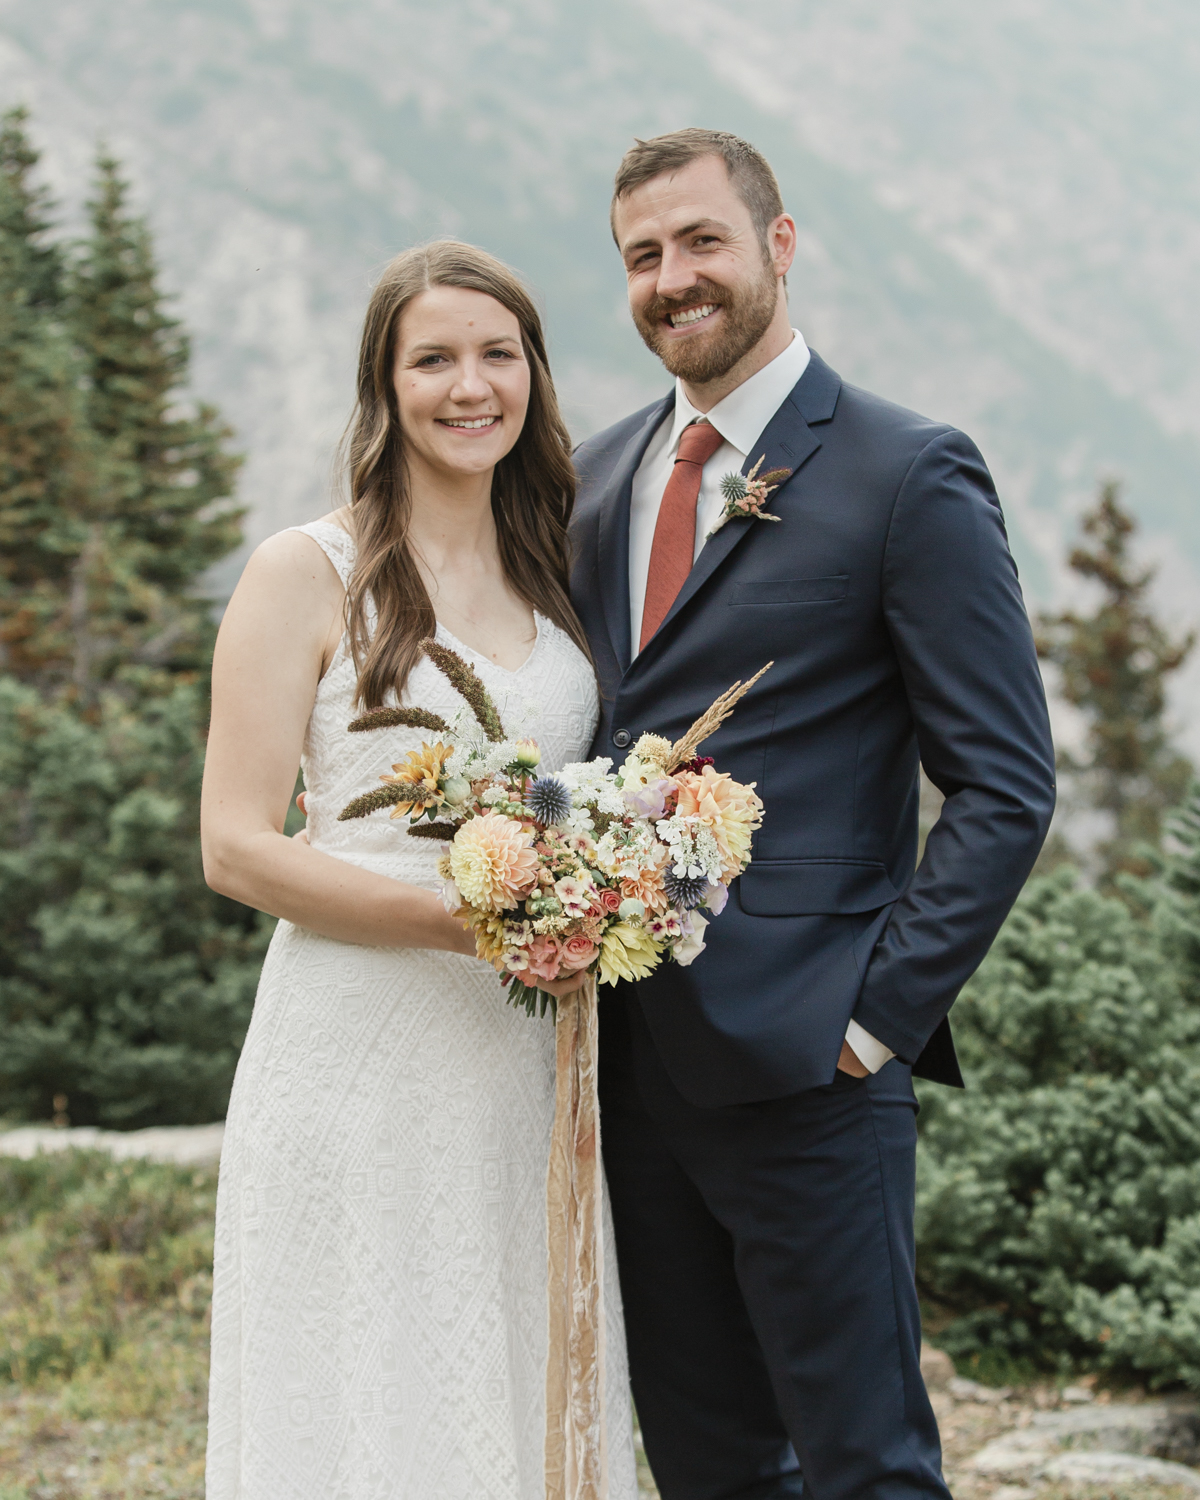 Banff Helicopter Elopement. A private and romantic wedding. 